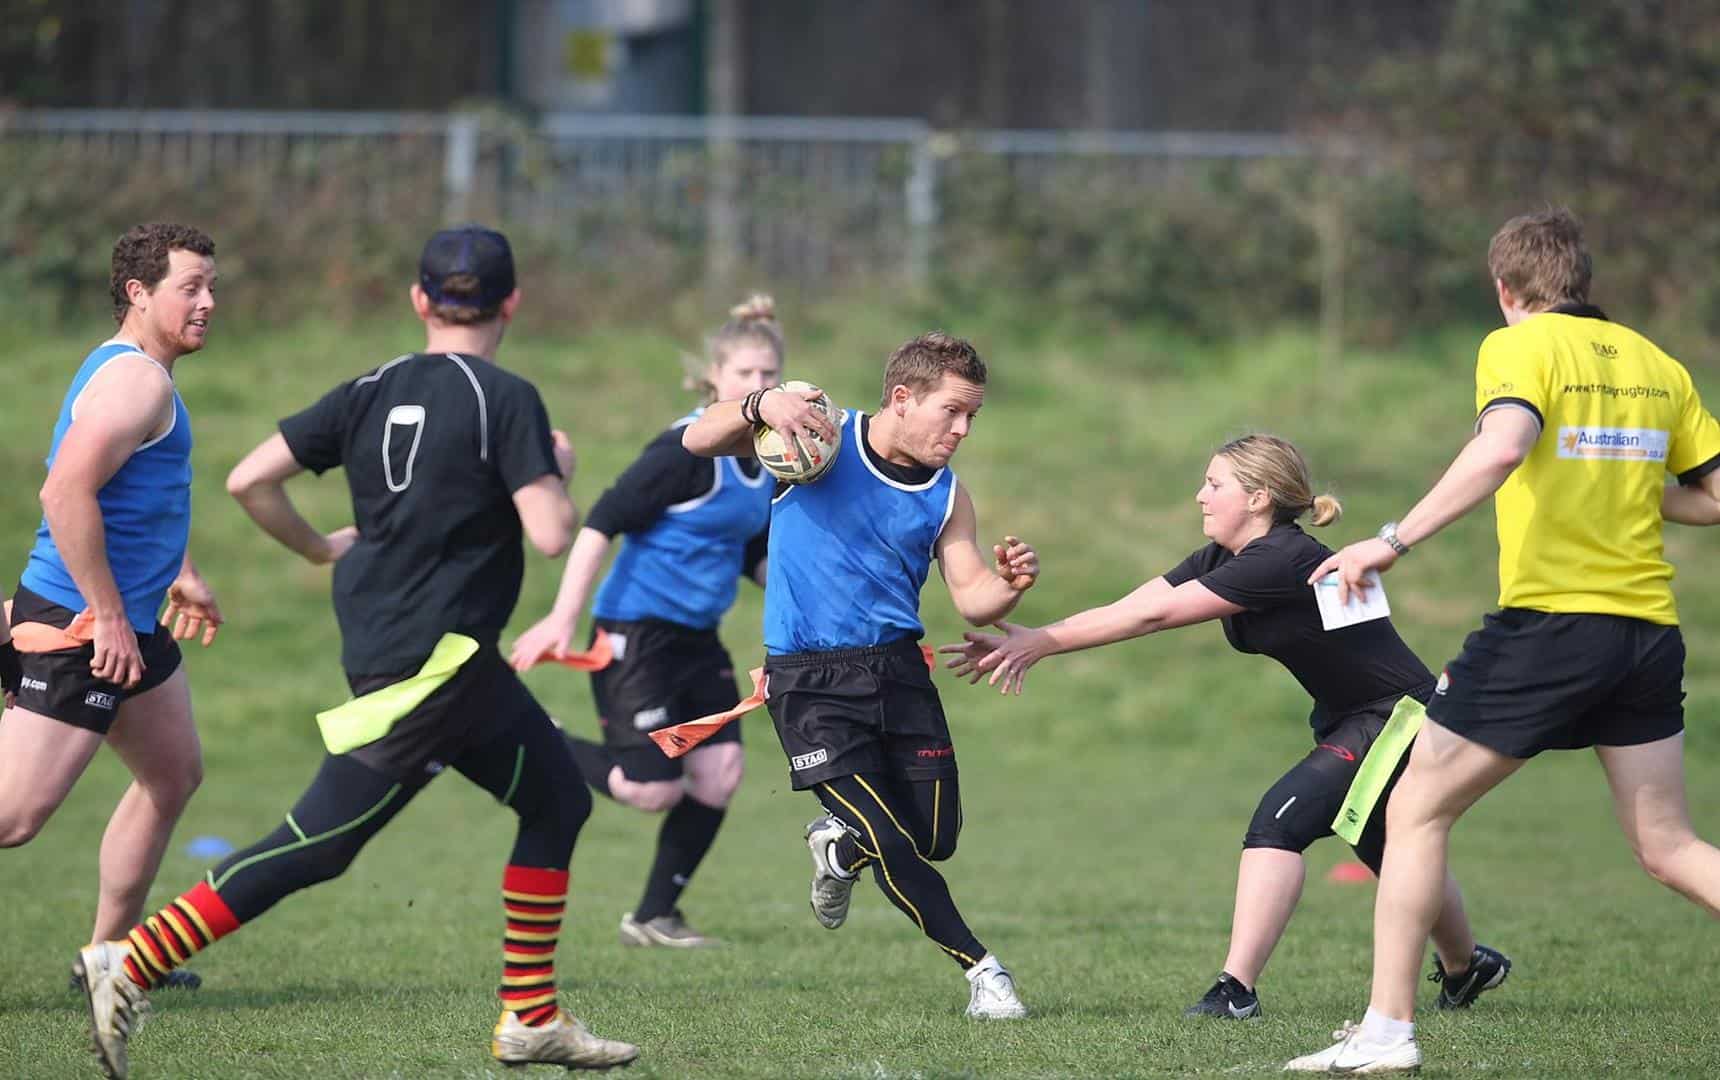 tag-rugby-kicks-off-across-london-for-2012-australian-times-news